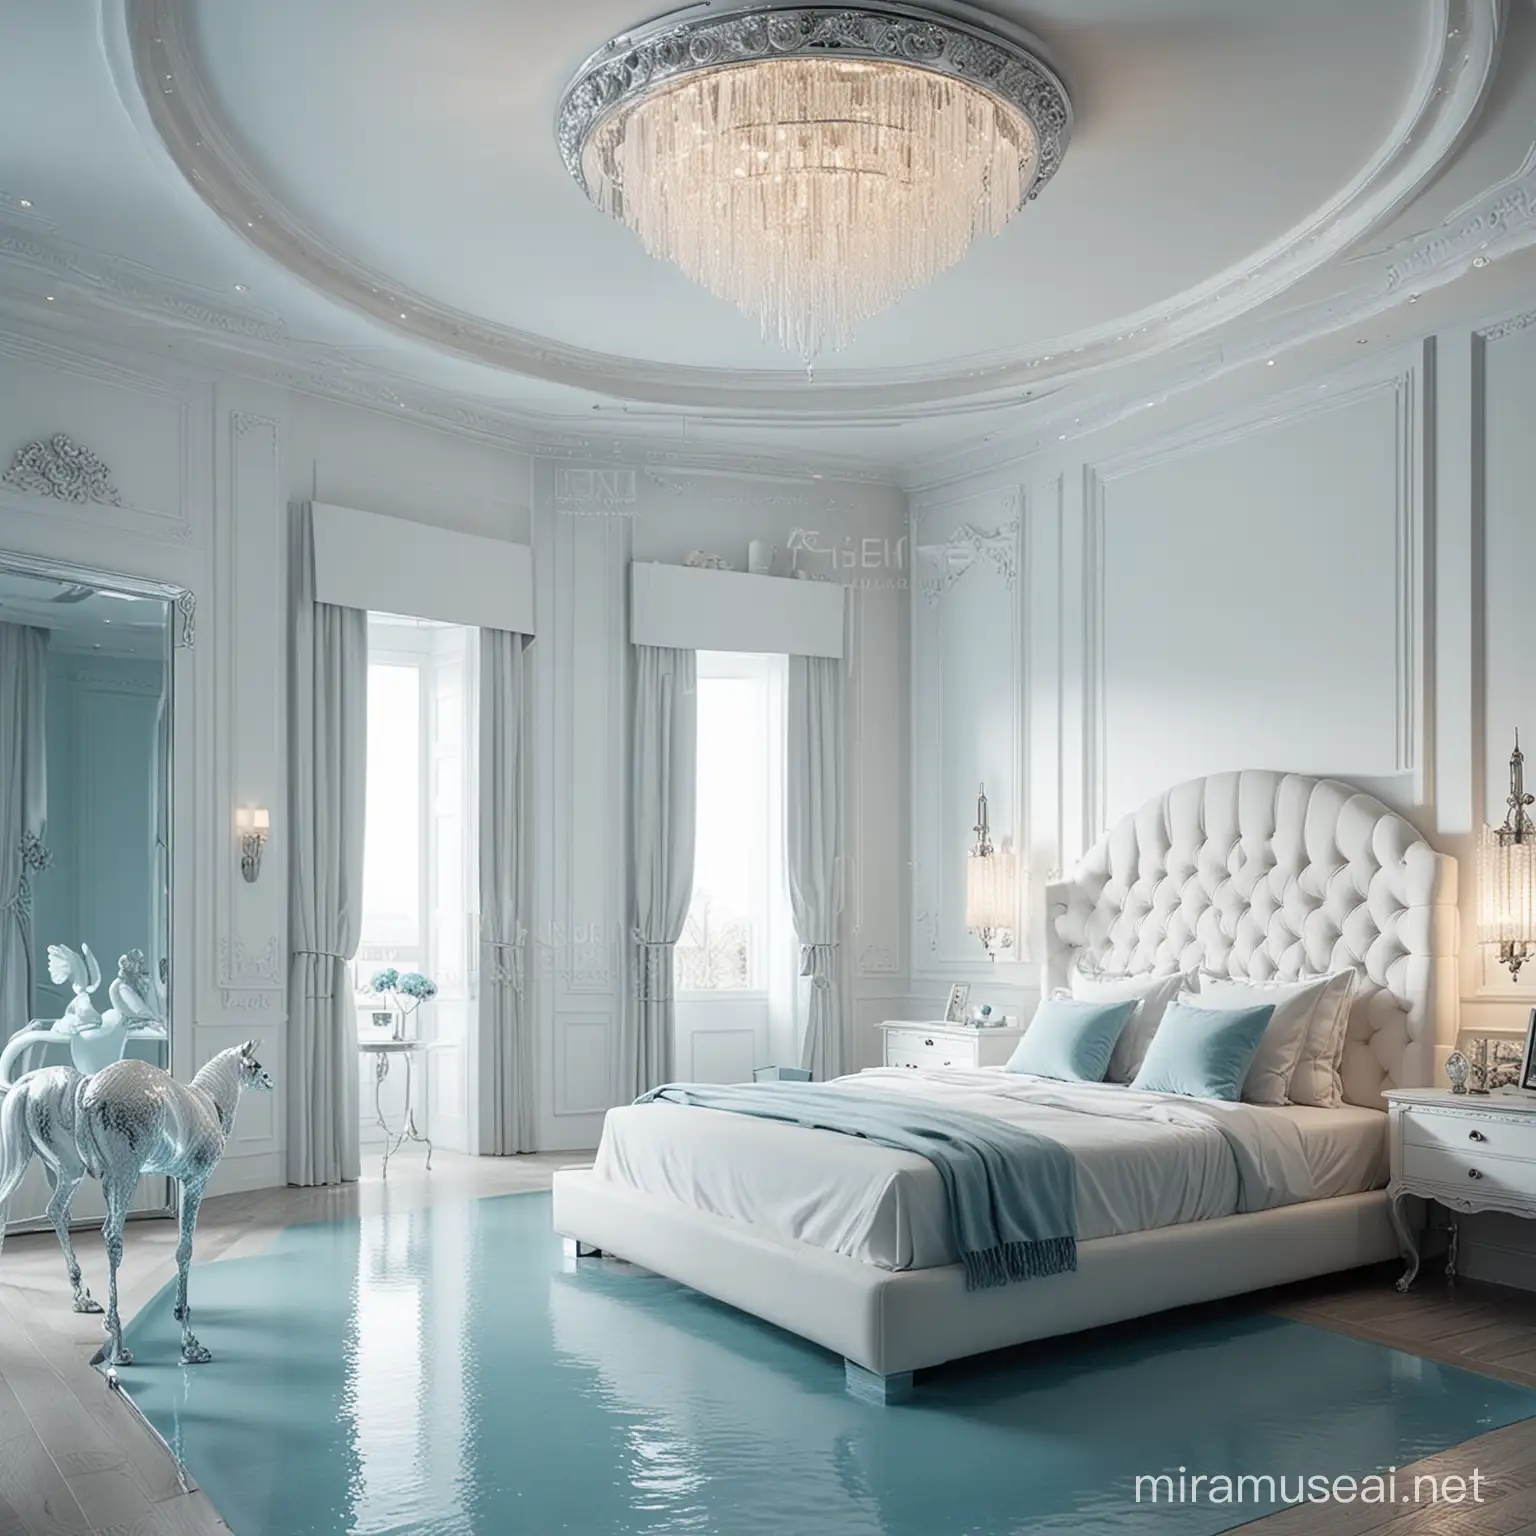 Interior design of a luxurious bedroom with a nice small glass pool and a lamp. It has a futuristic design of ceiling lights and silver animal statues. The major colours are white and light blue. Cinematic lighting. Hyperealistic photography